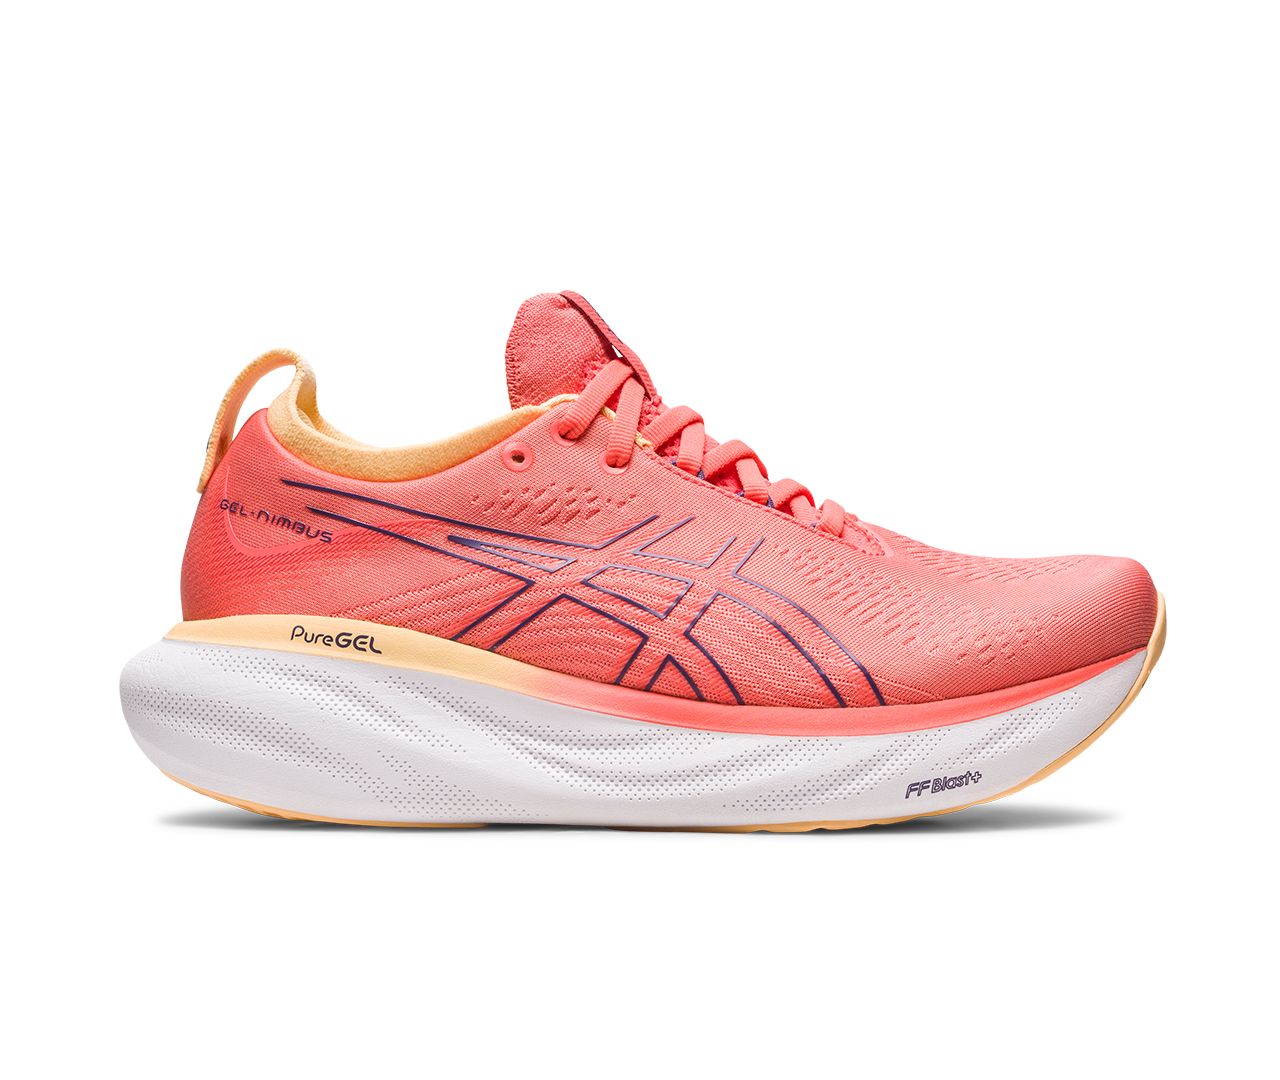 A running review of the Asics MetaRide